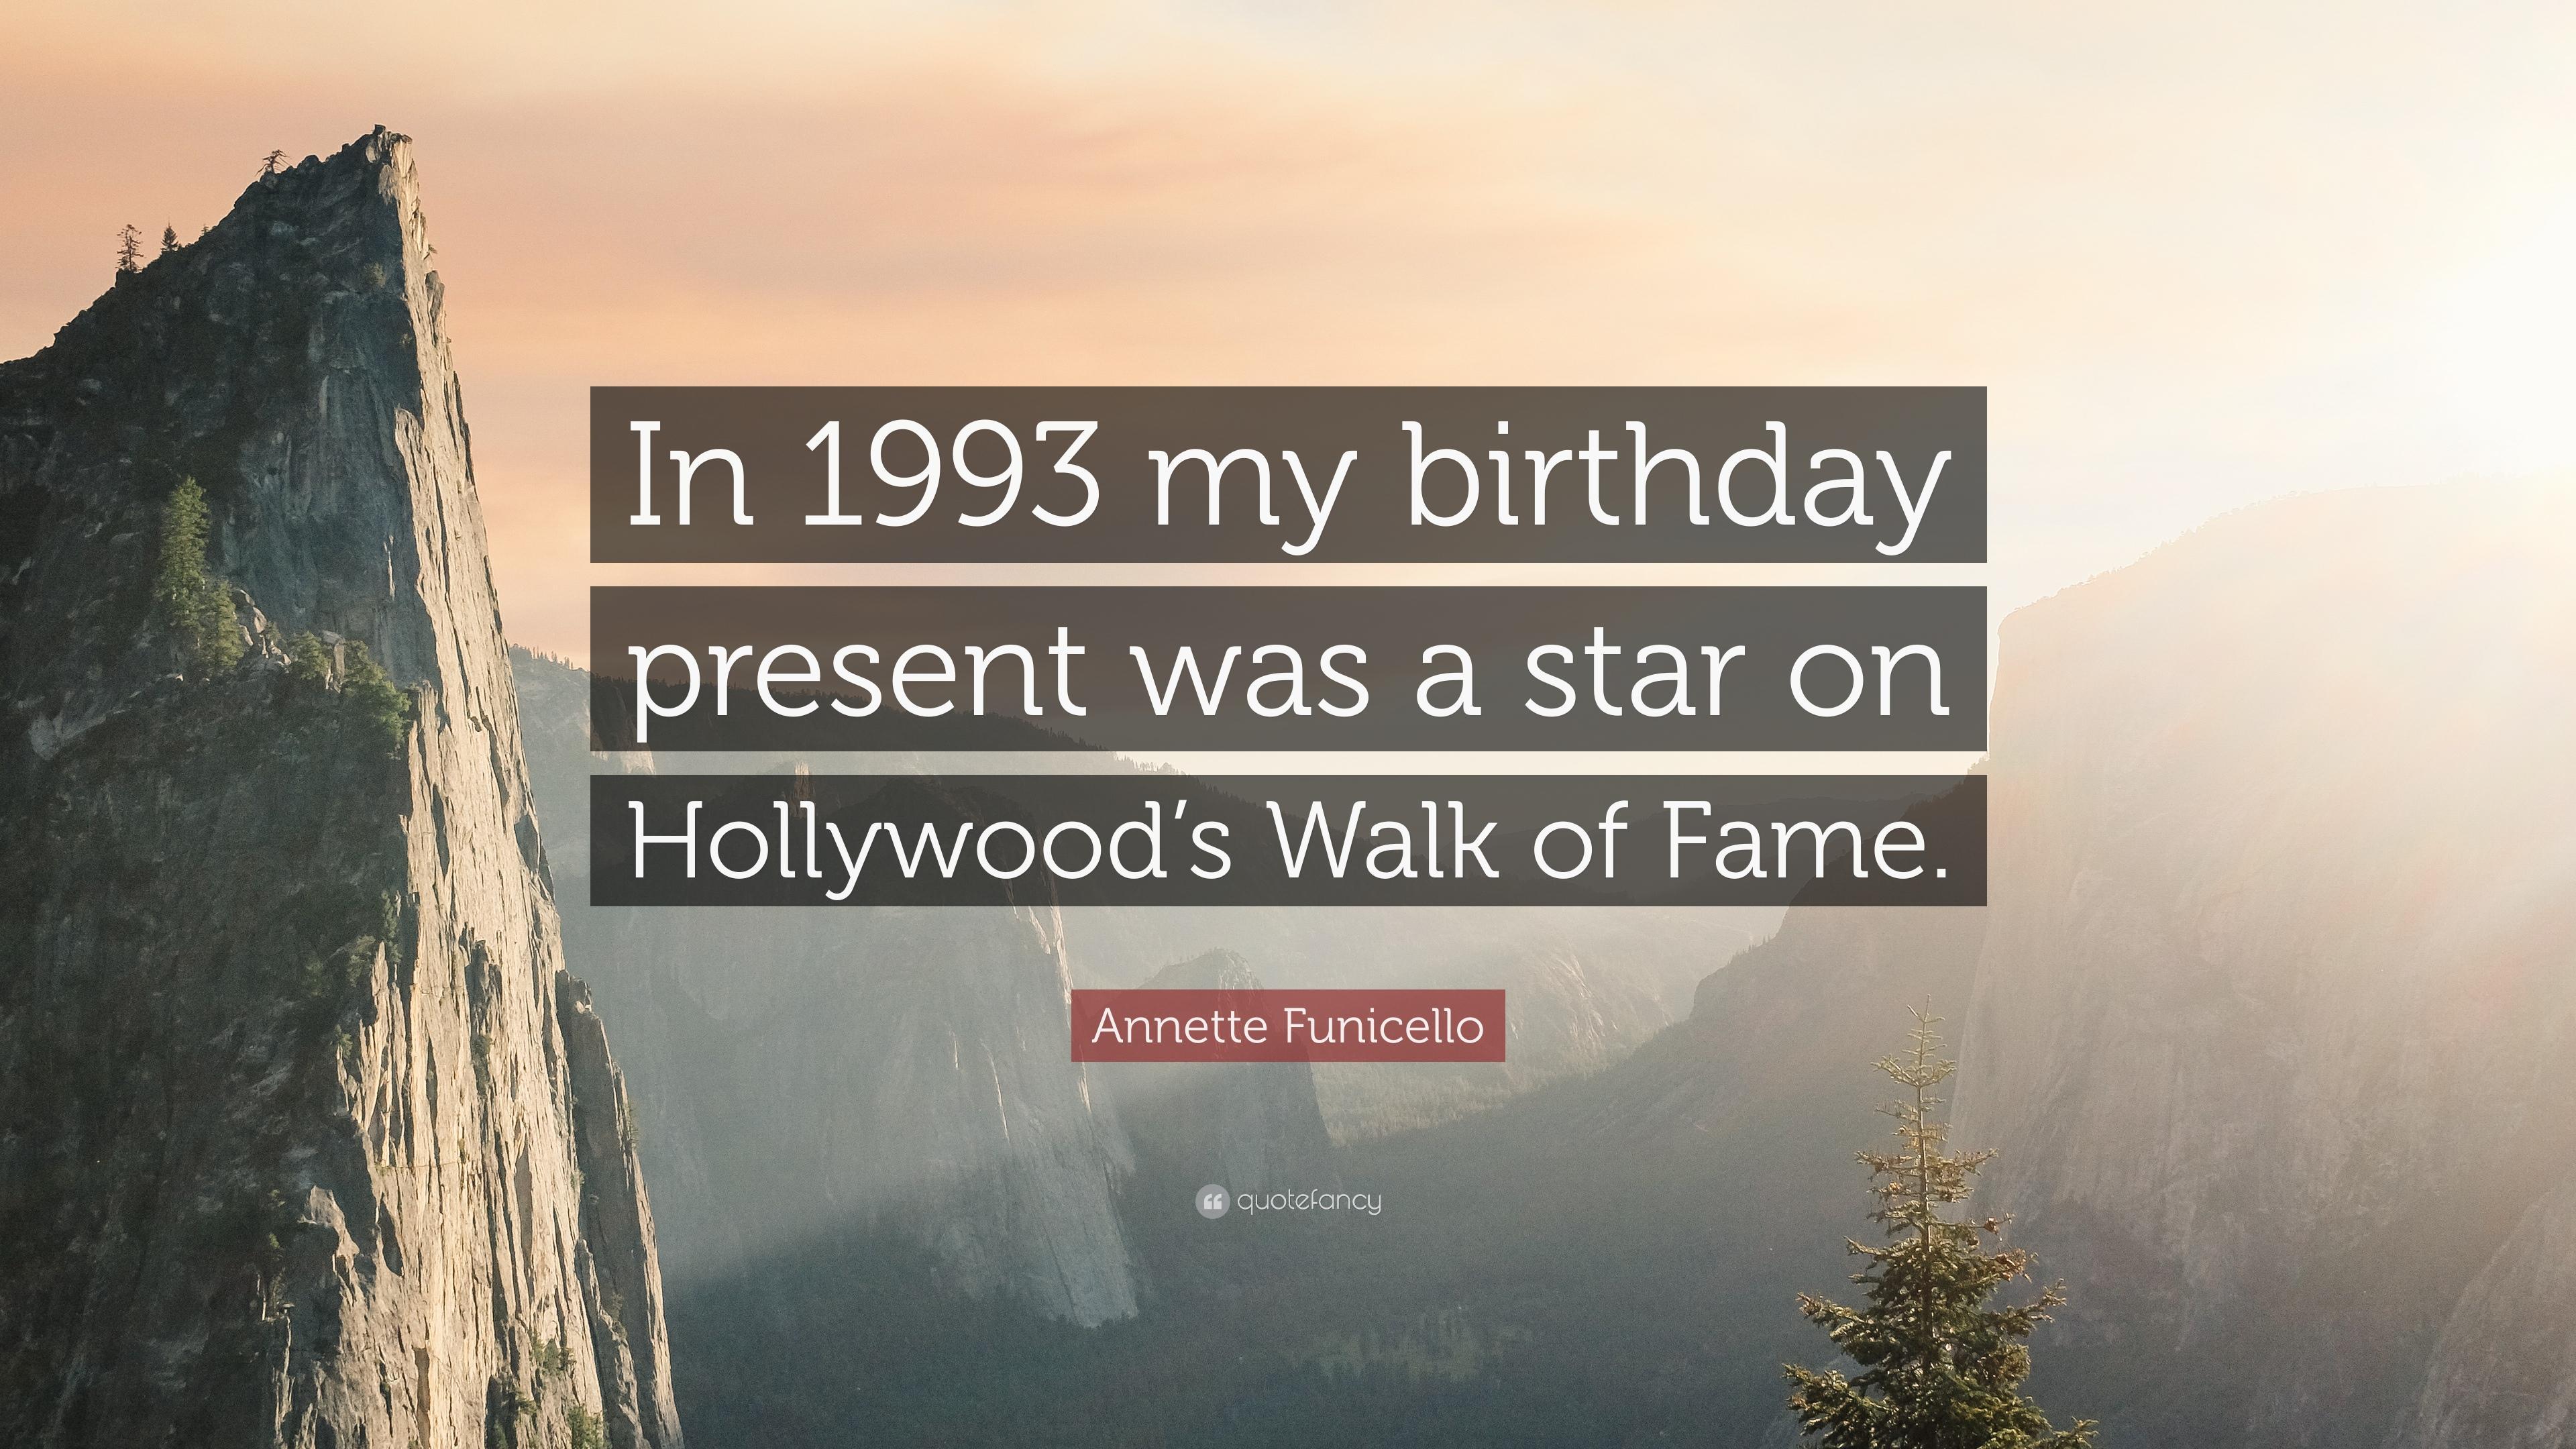 Annette Funicello Quote: “In 1993 my birthday present was a star